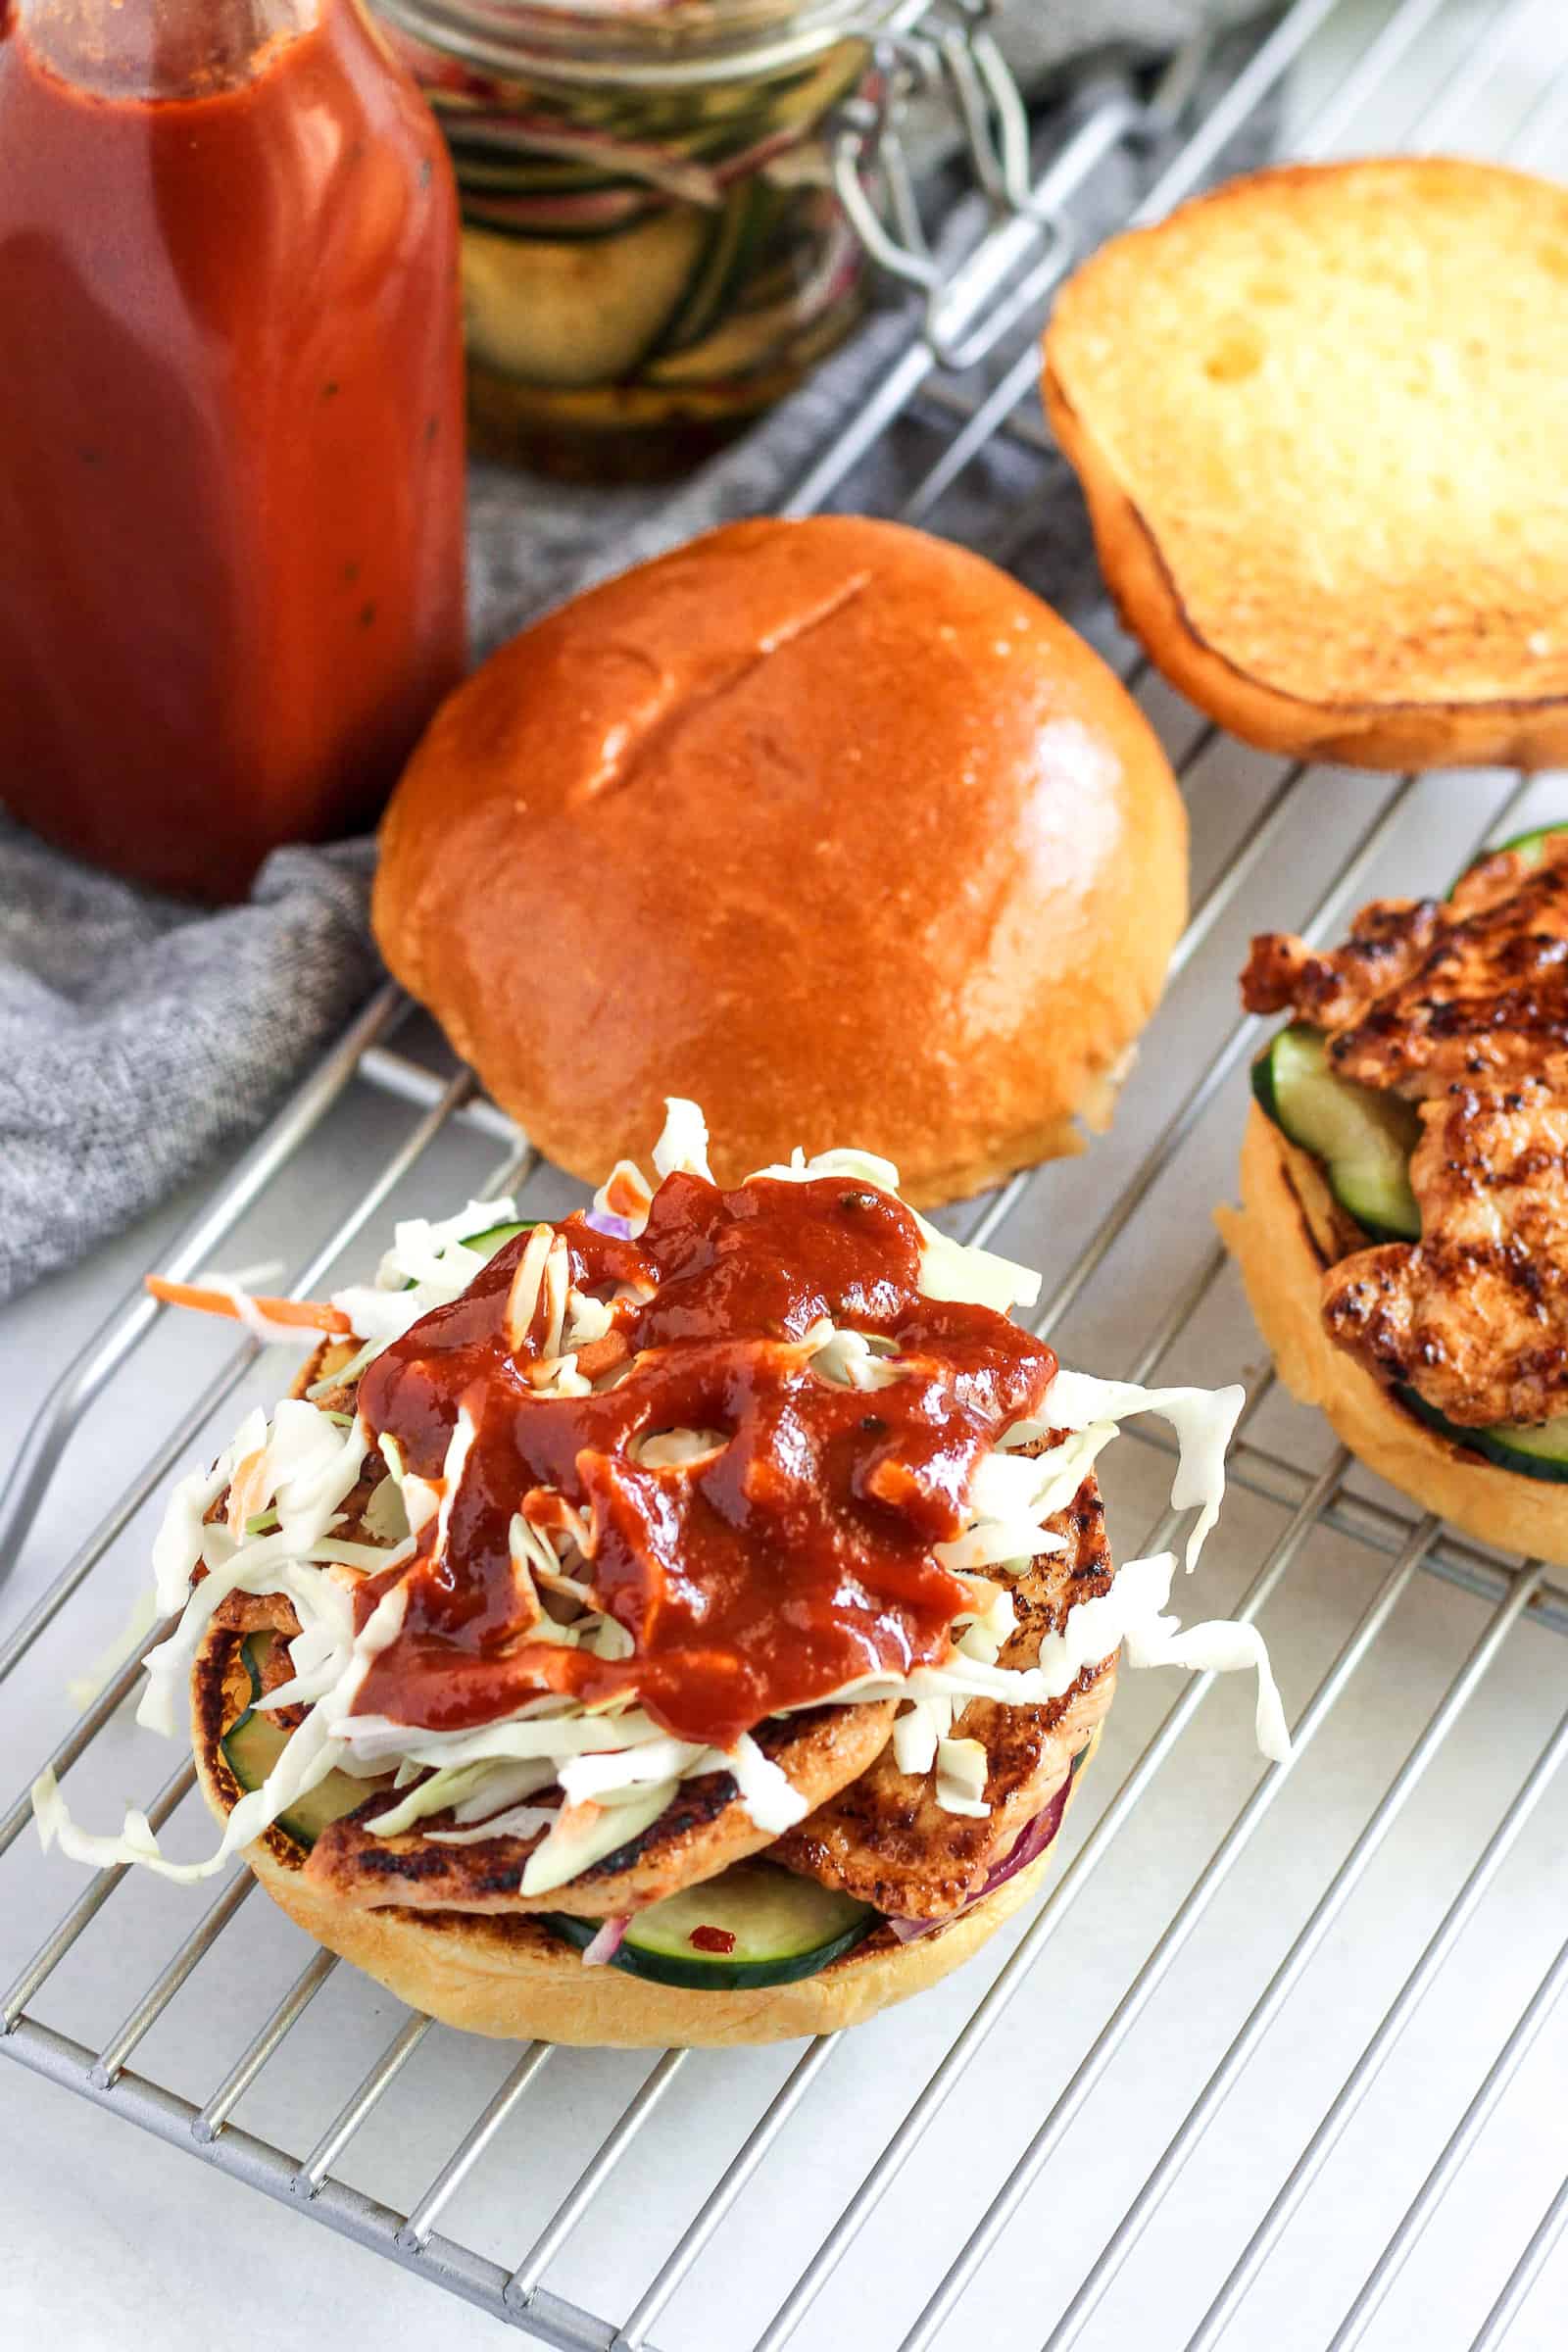 This fast pork recipe for Gochujang Pork Sandwiches is spicy, hearty, and easy. Enjoy this easy pork recipe using Smithfield Prime Fresh Pork | Street Smart Nutrition